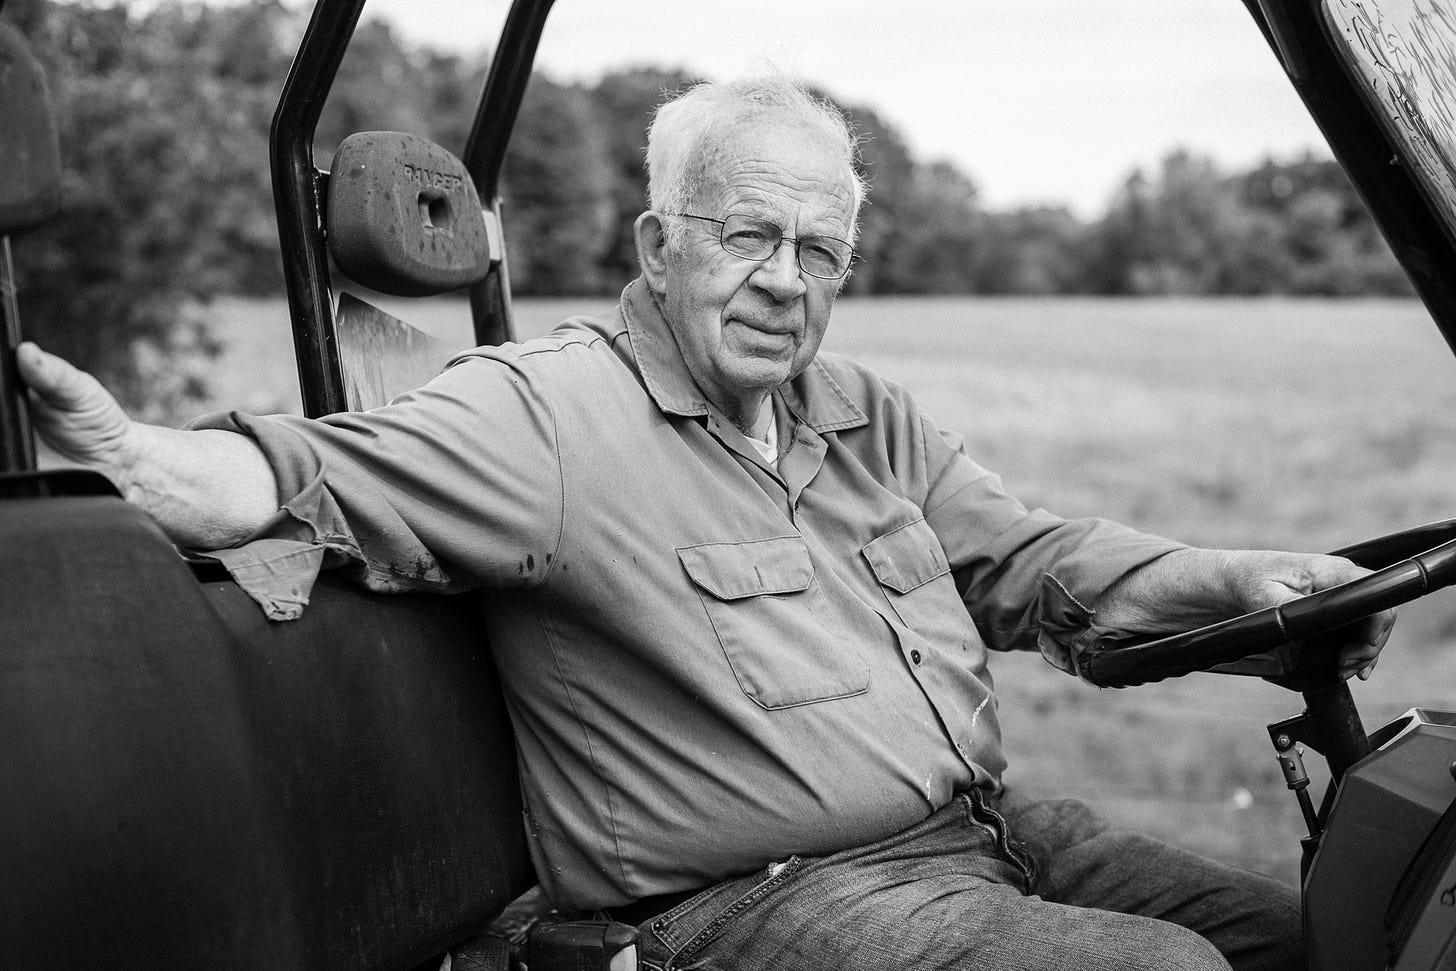 Black and white portrait of an older man in a buggy